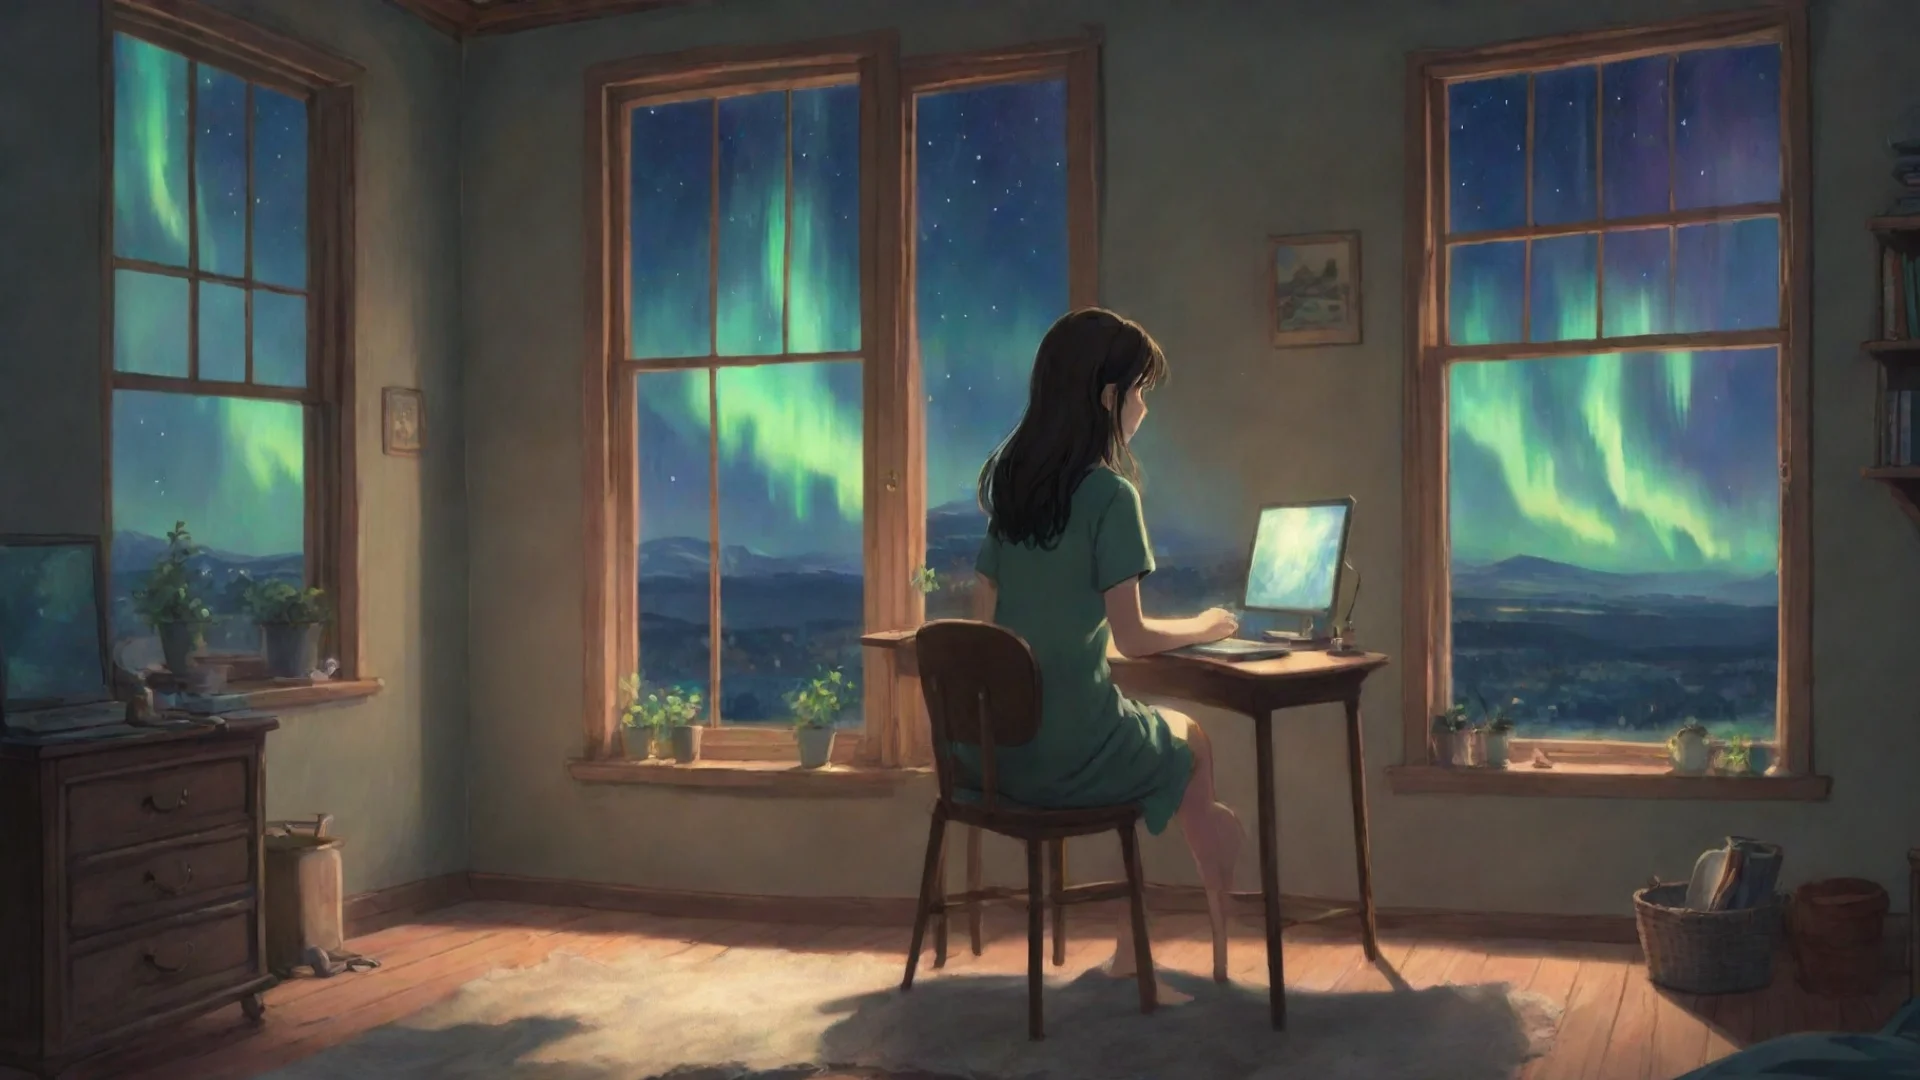 can you draw of a girl sitting on a chair and using a computer inside of his house and the window is like northern lights in studio ghibli art style hdwidescreen